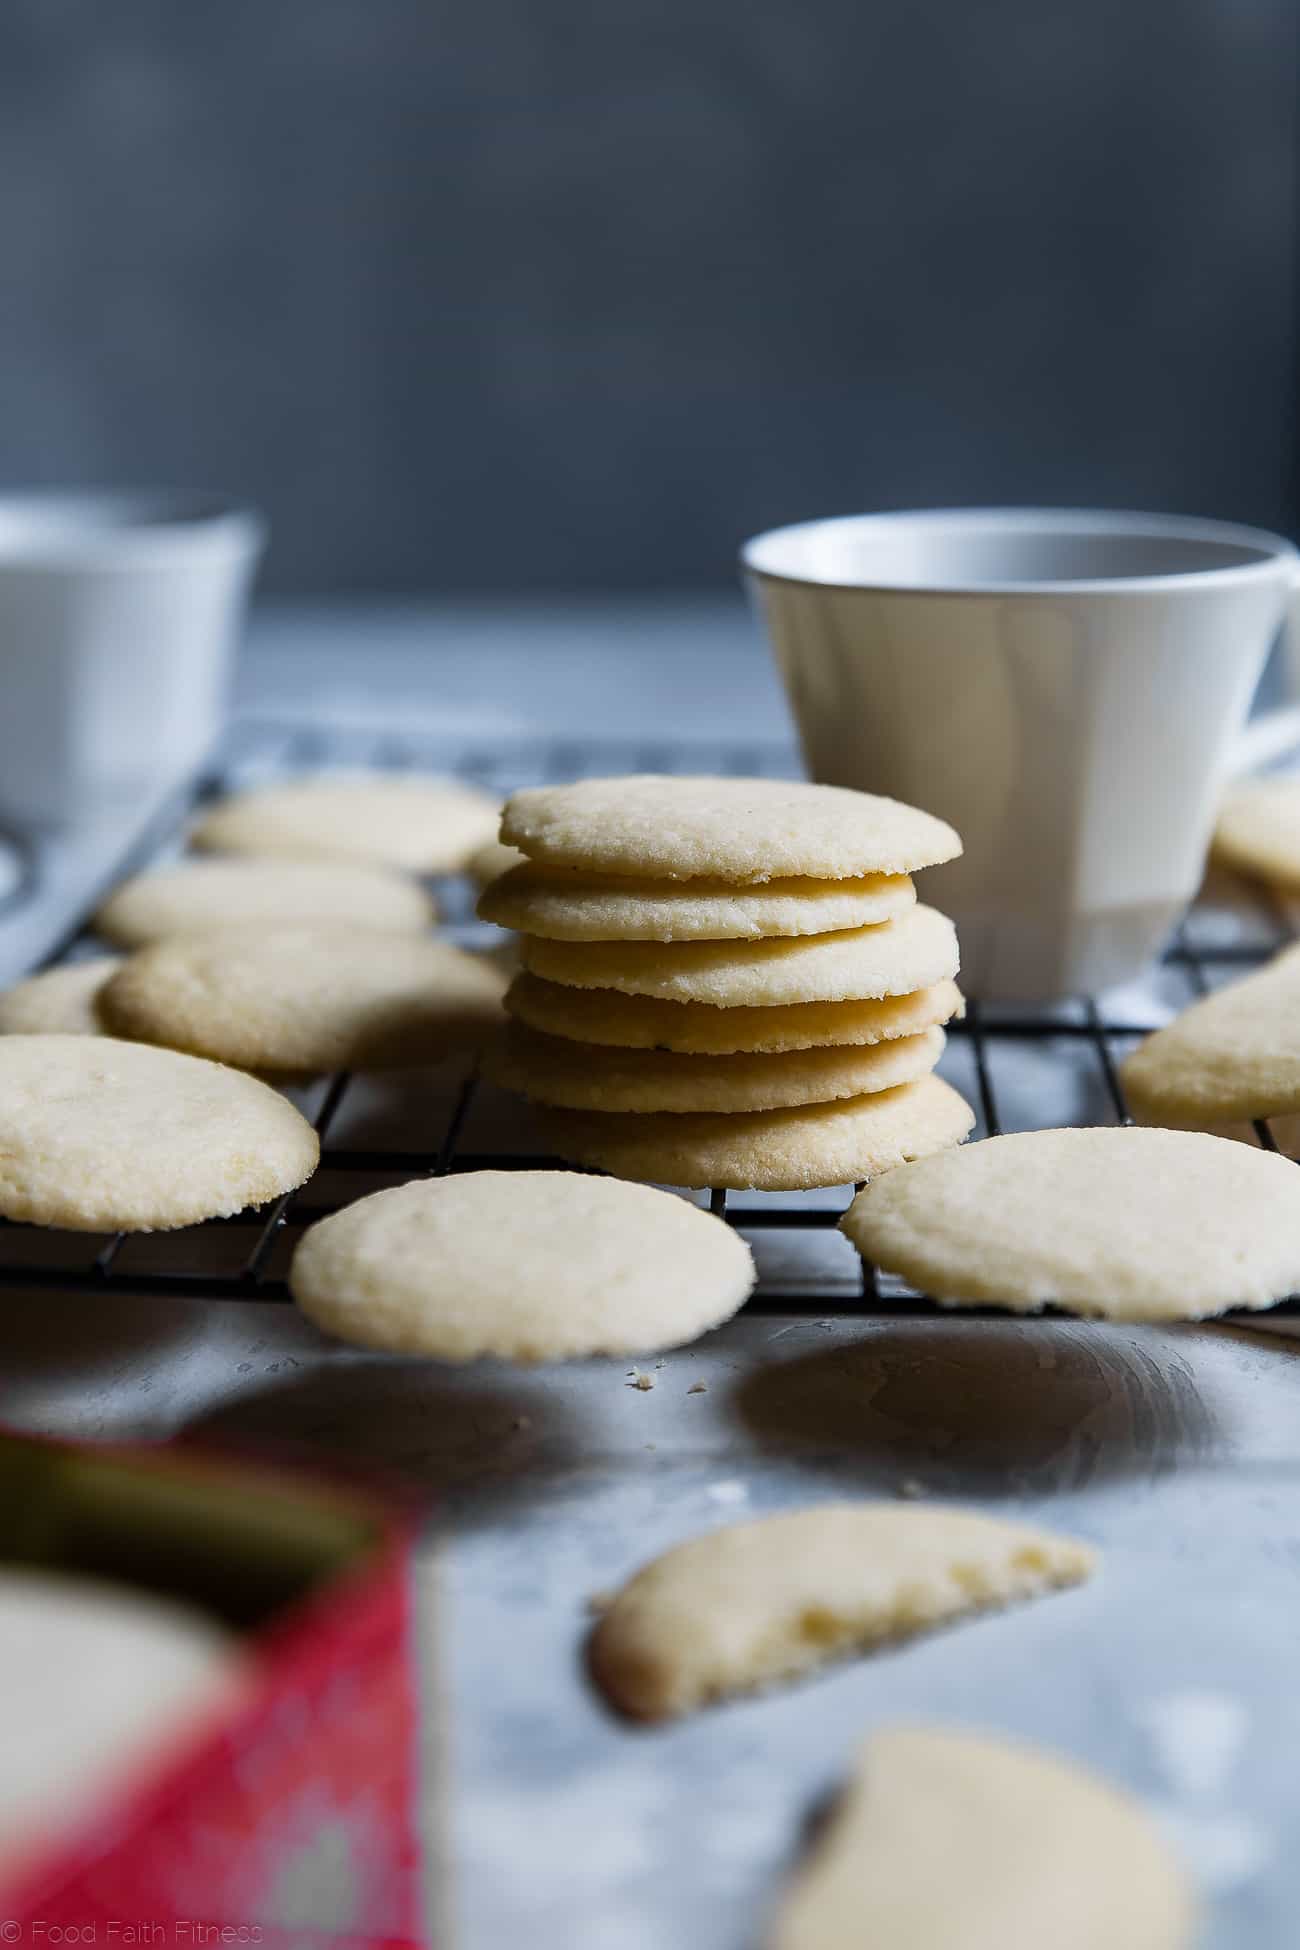 Paleo Whipped Gluten Free Shortbread Cookies - These easy shortbread cookies actually melt in your mouth and are only 60 calories! They're secretly sugar free, healthy and vegan/keto friendly too! | Foodfaithfitness.com | @FoodFaithFit